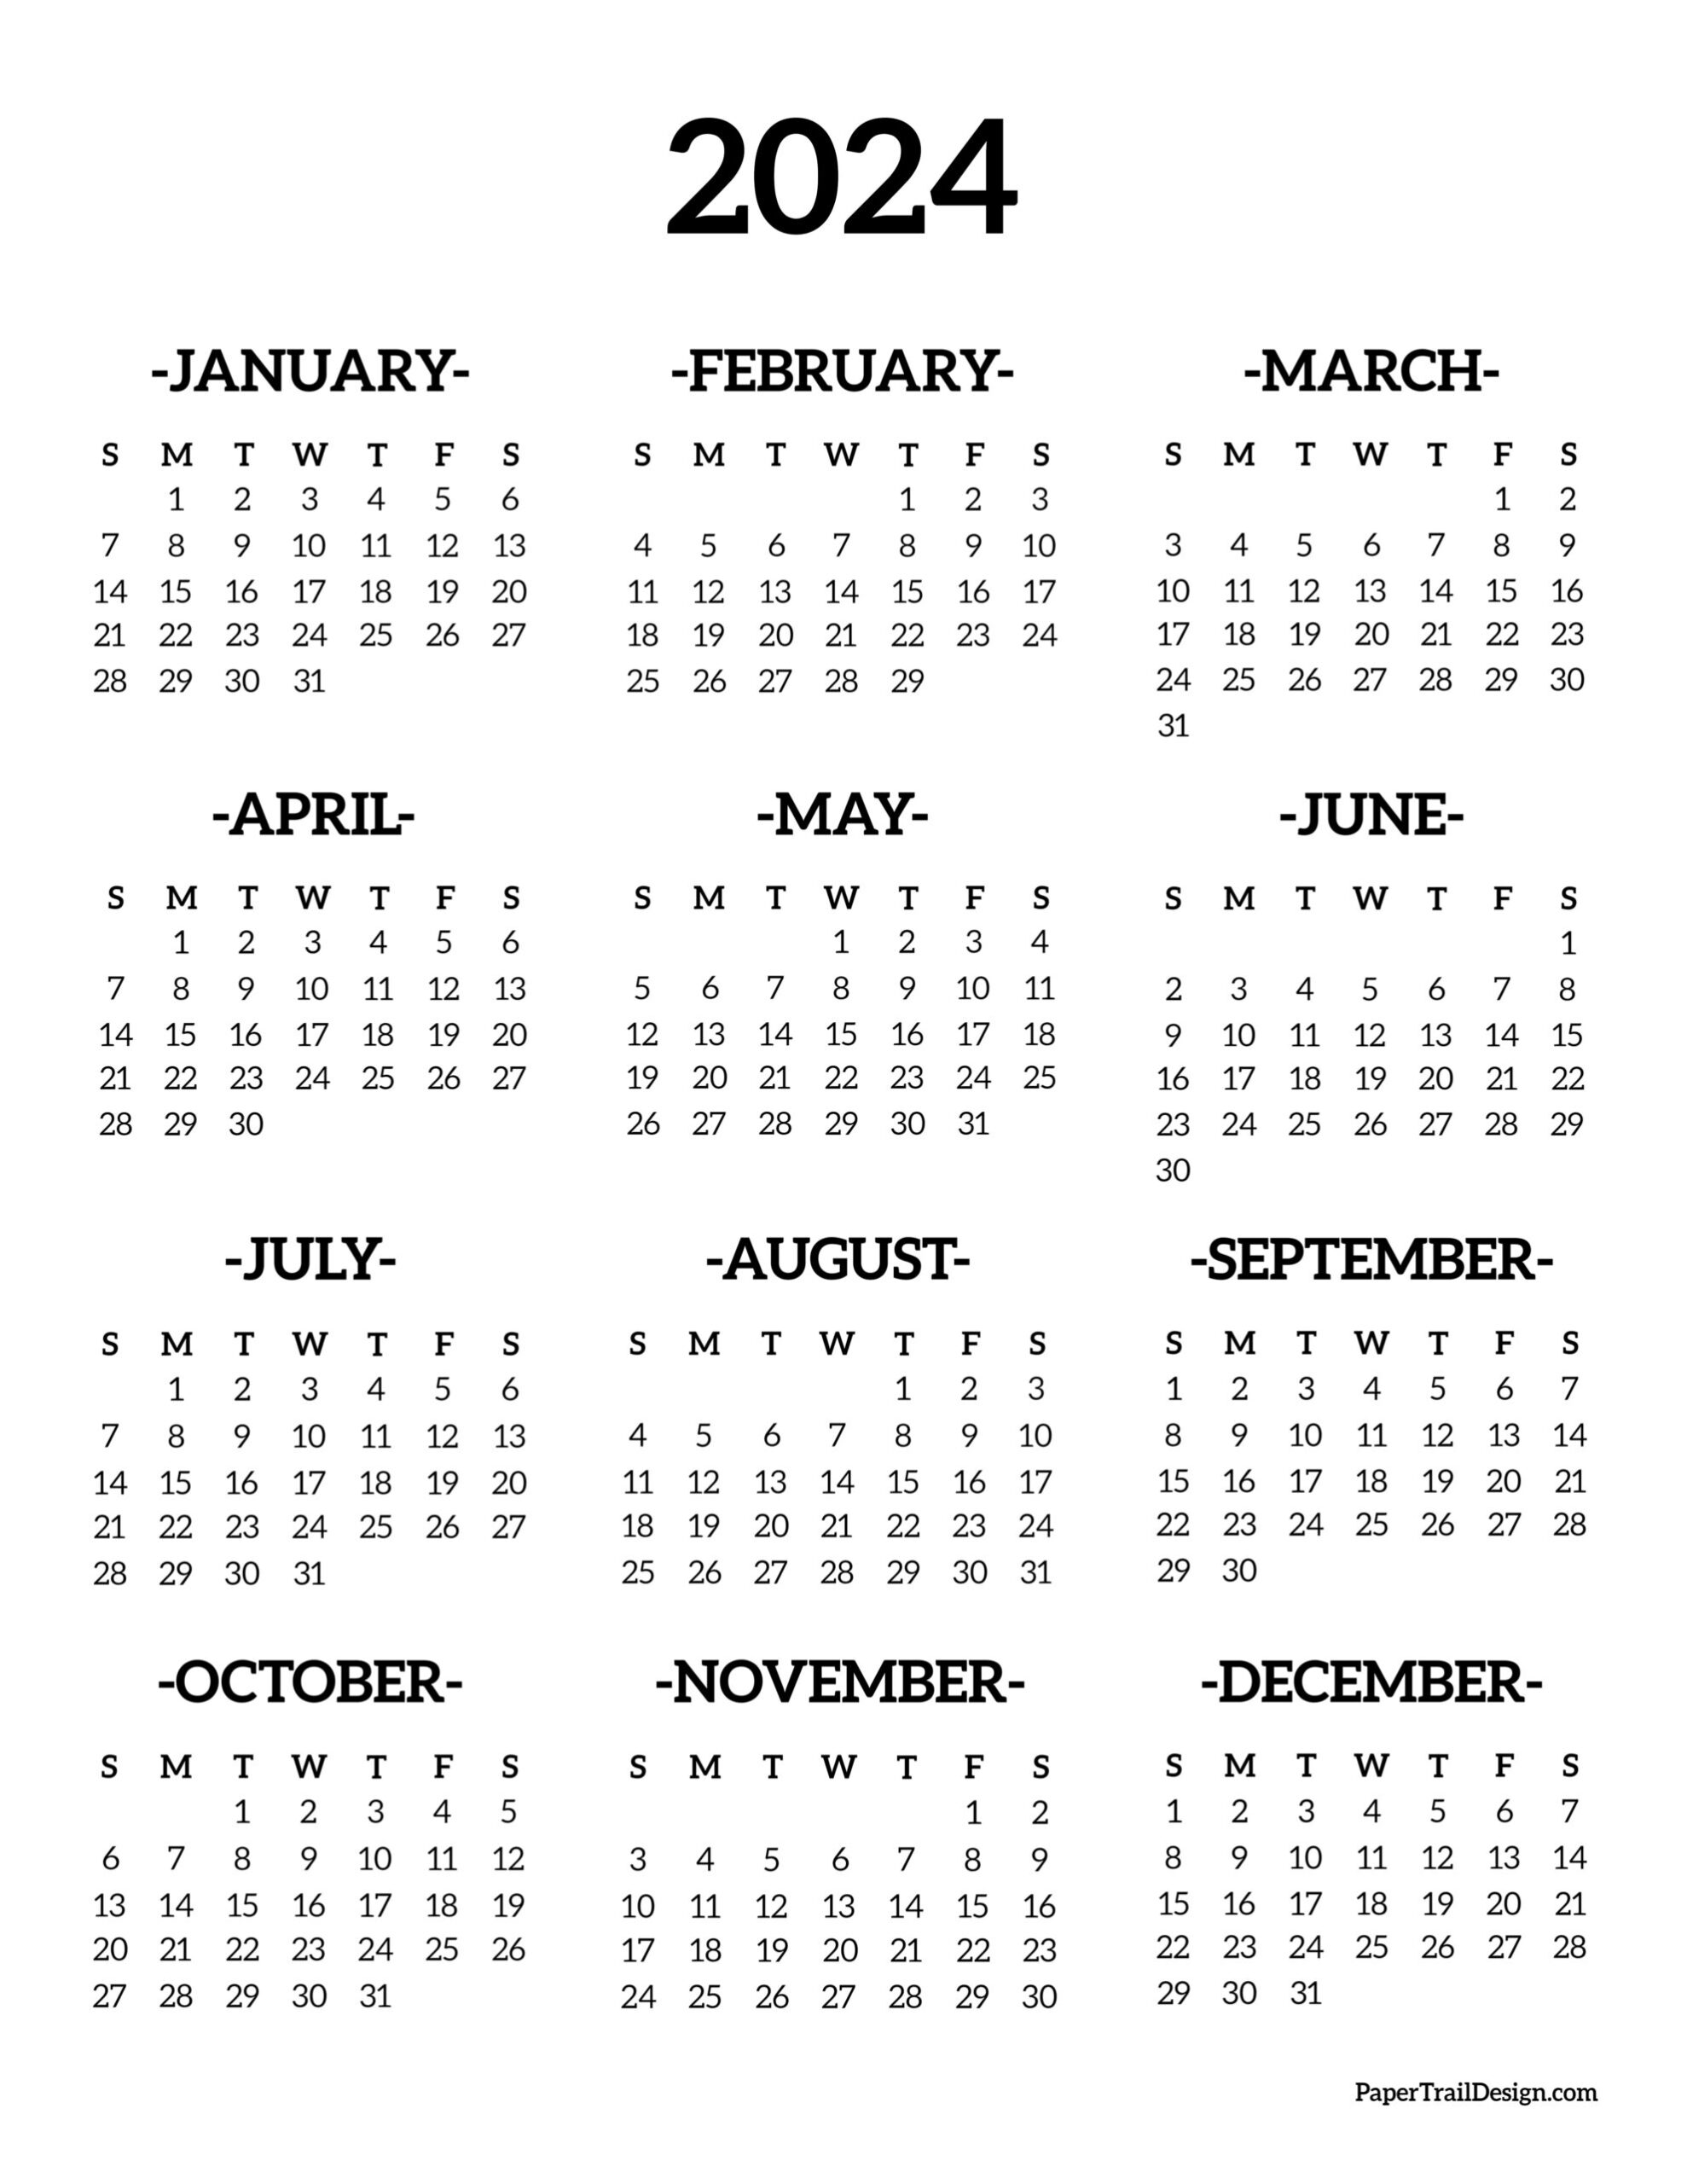 Calendar 2024 Printable One Page - Paper Trail Design for Printable Calendar 2024 Black And White